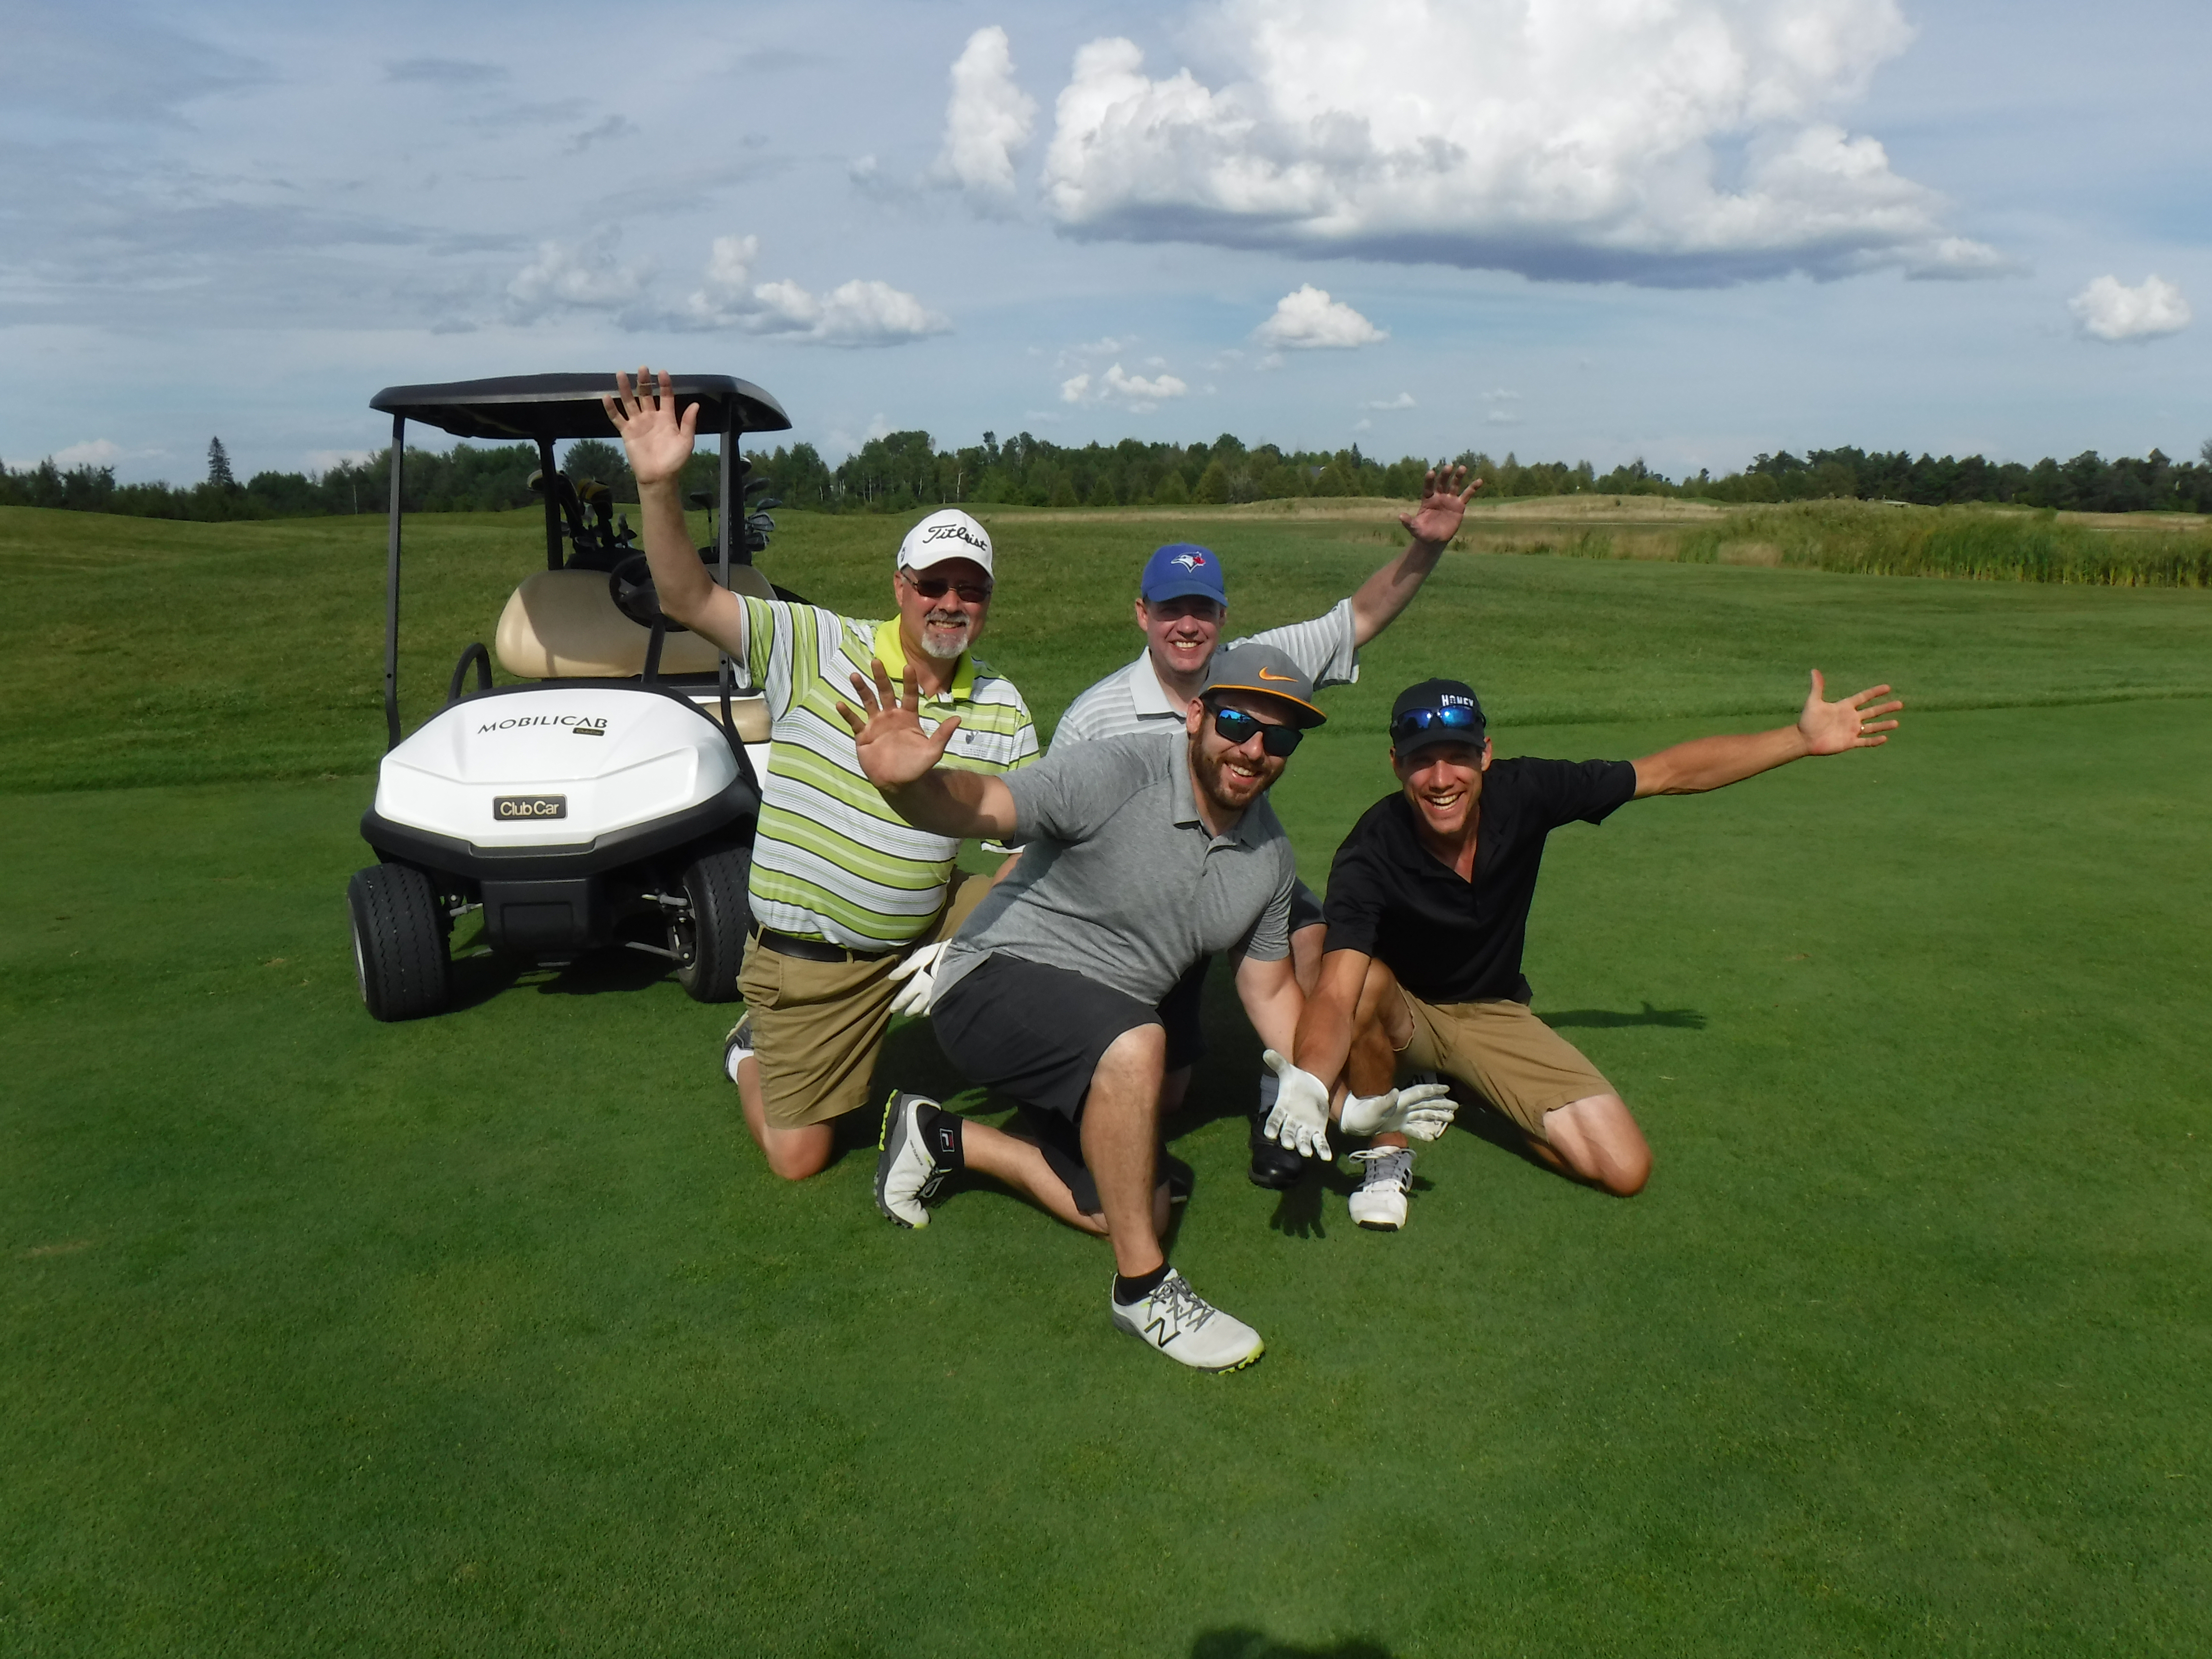 Group of men crouched down with arms up in the air smiling on golf course